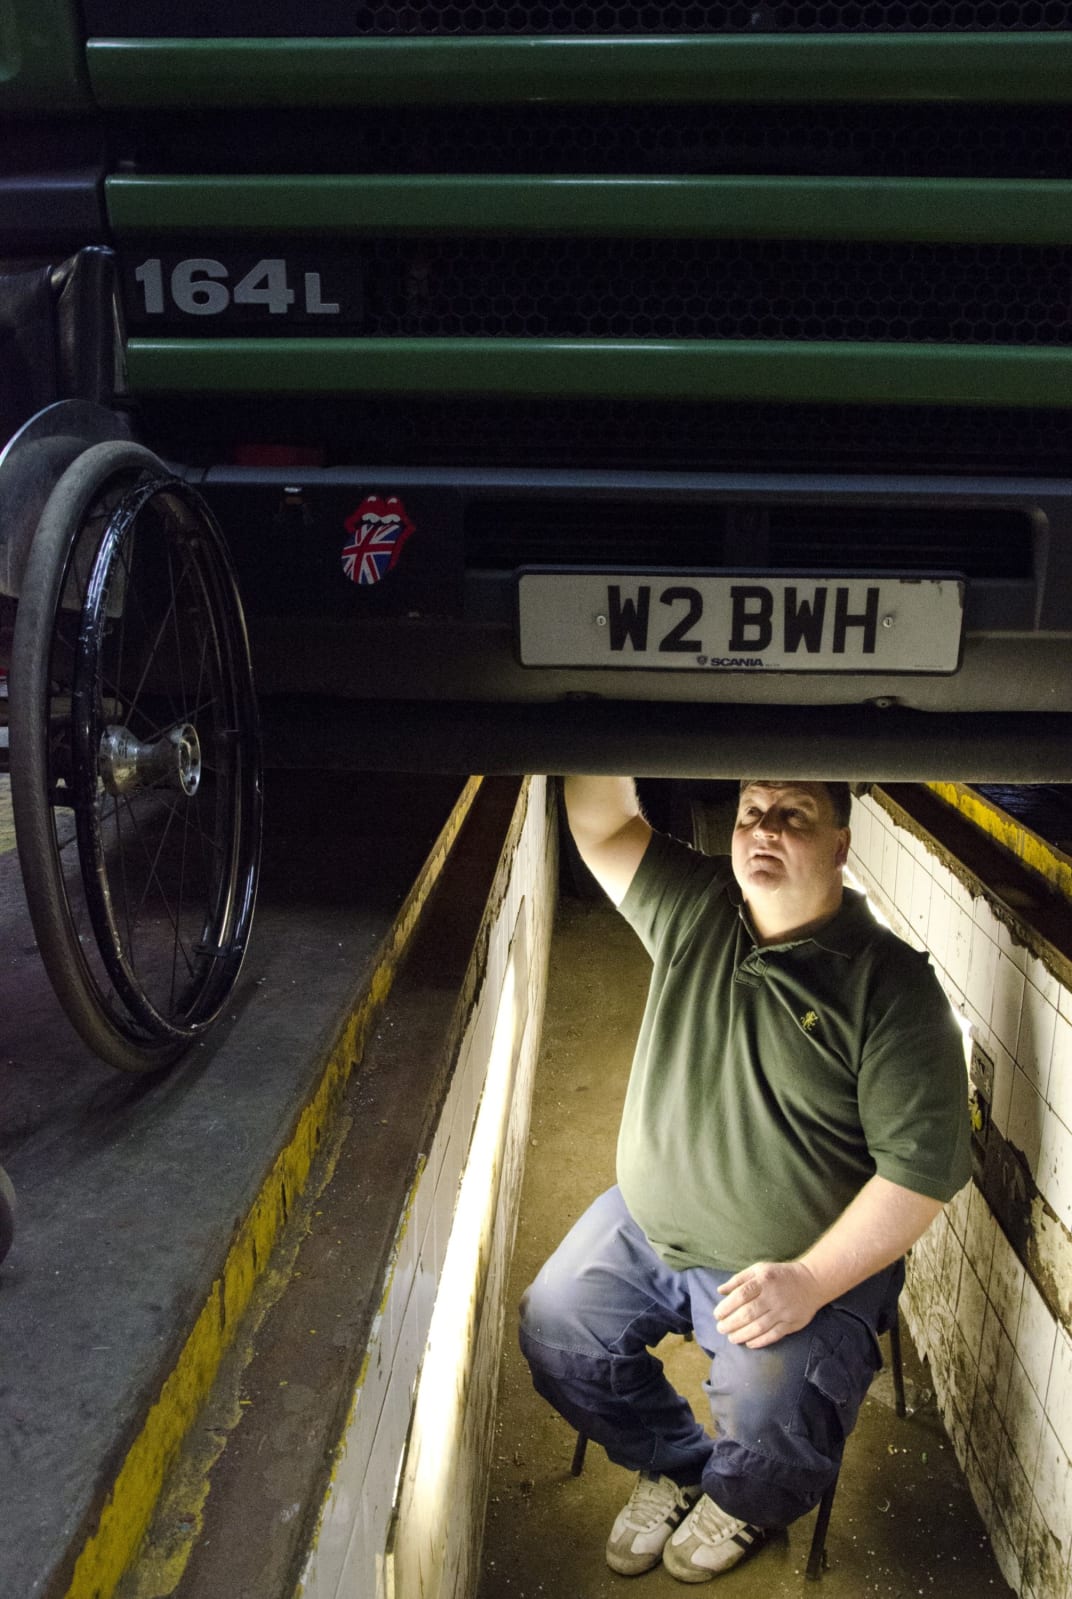 Brian working underneath a truck, with wheelchair on the side